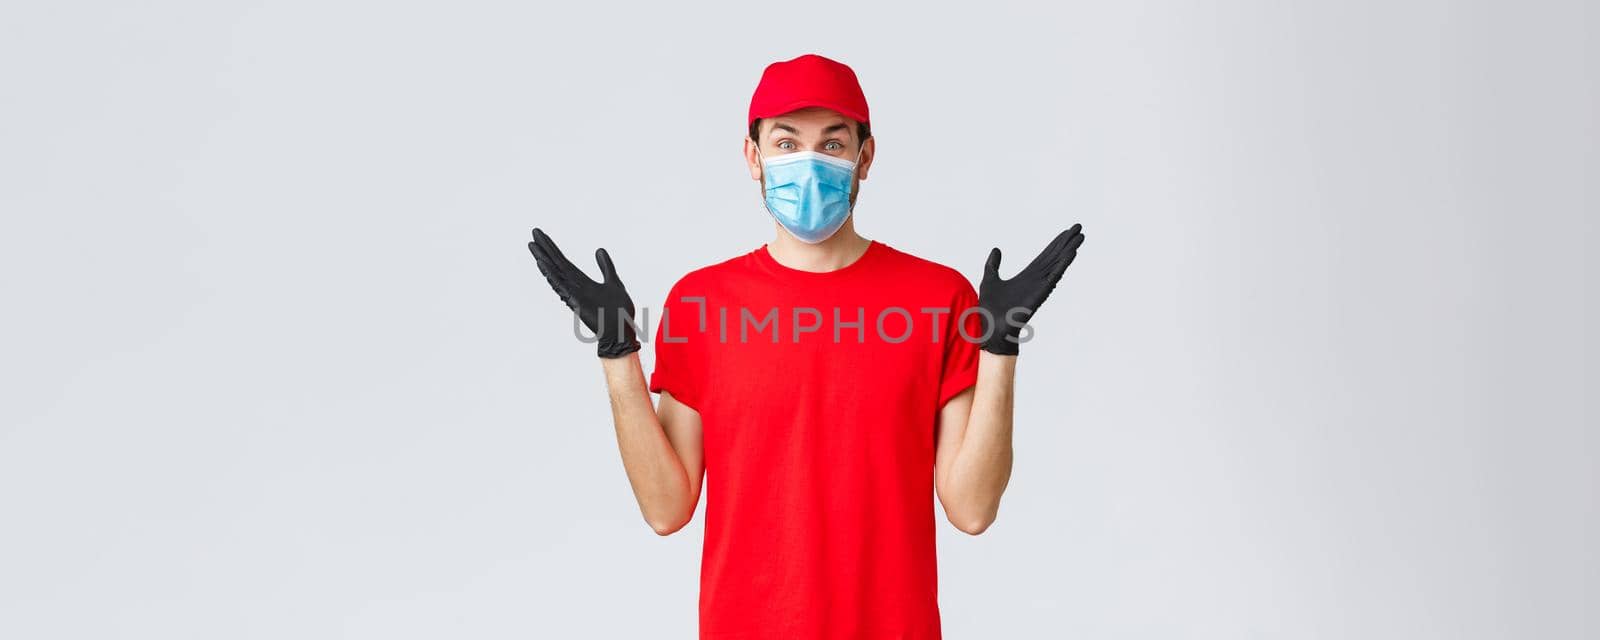 Groceries and packages delivery, covid-19, quarantine and shopping concept. Happy rejoicing delivery guy in red uniform, face mask and gloves receive good news, clap hands applause surprised.